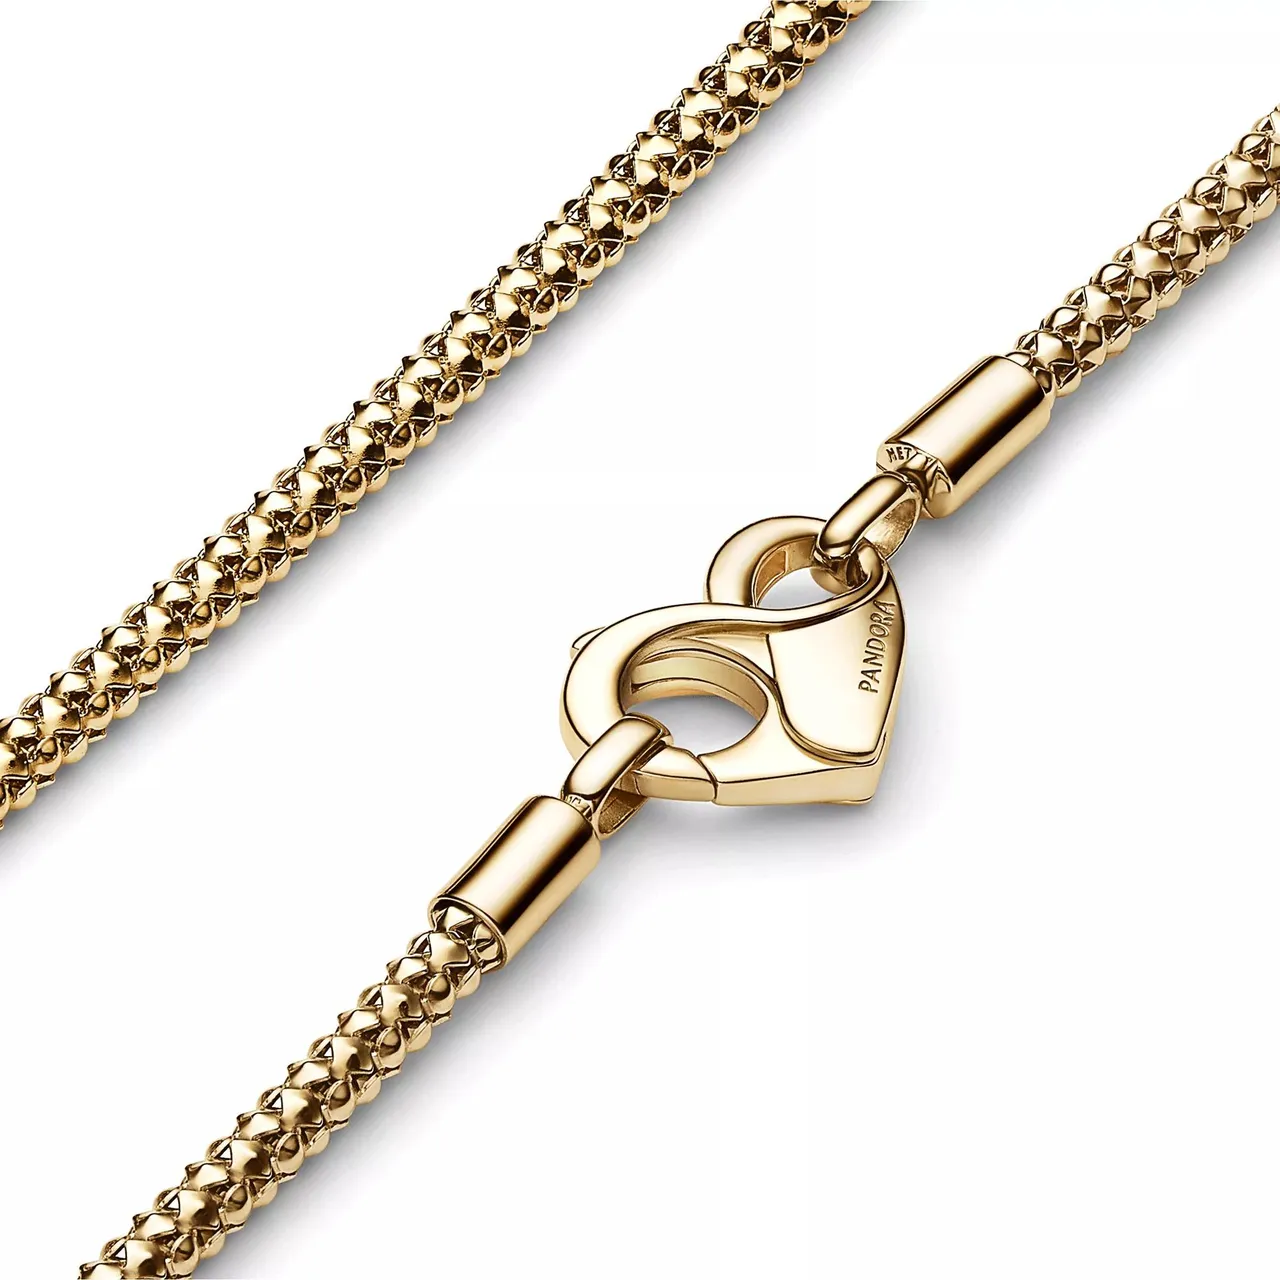 Pandora Necklaces - Pandora Moments Studded Chain Necklace - gold - Necklaces for ladies